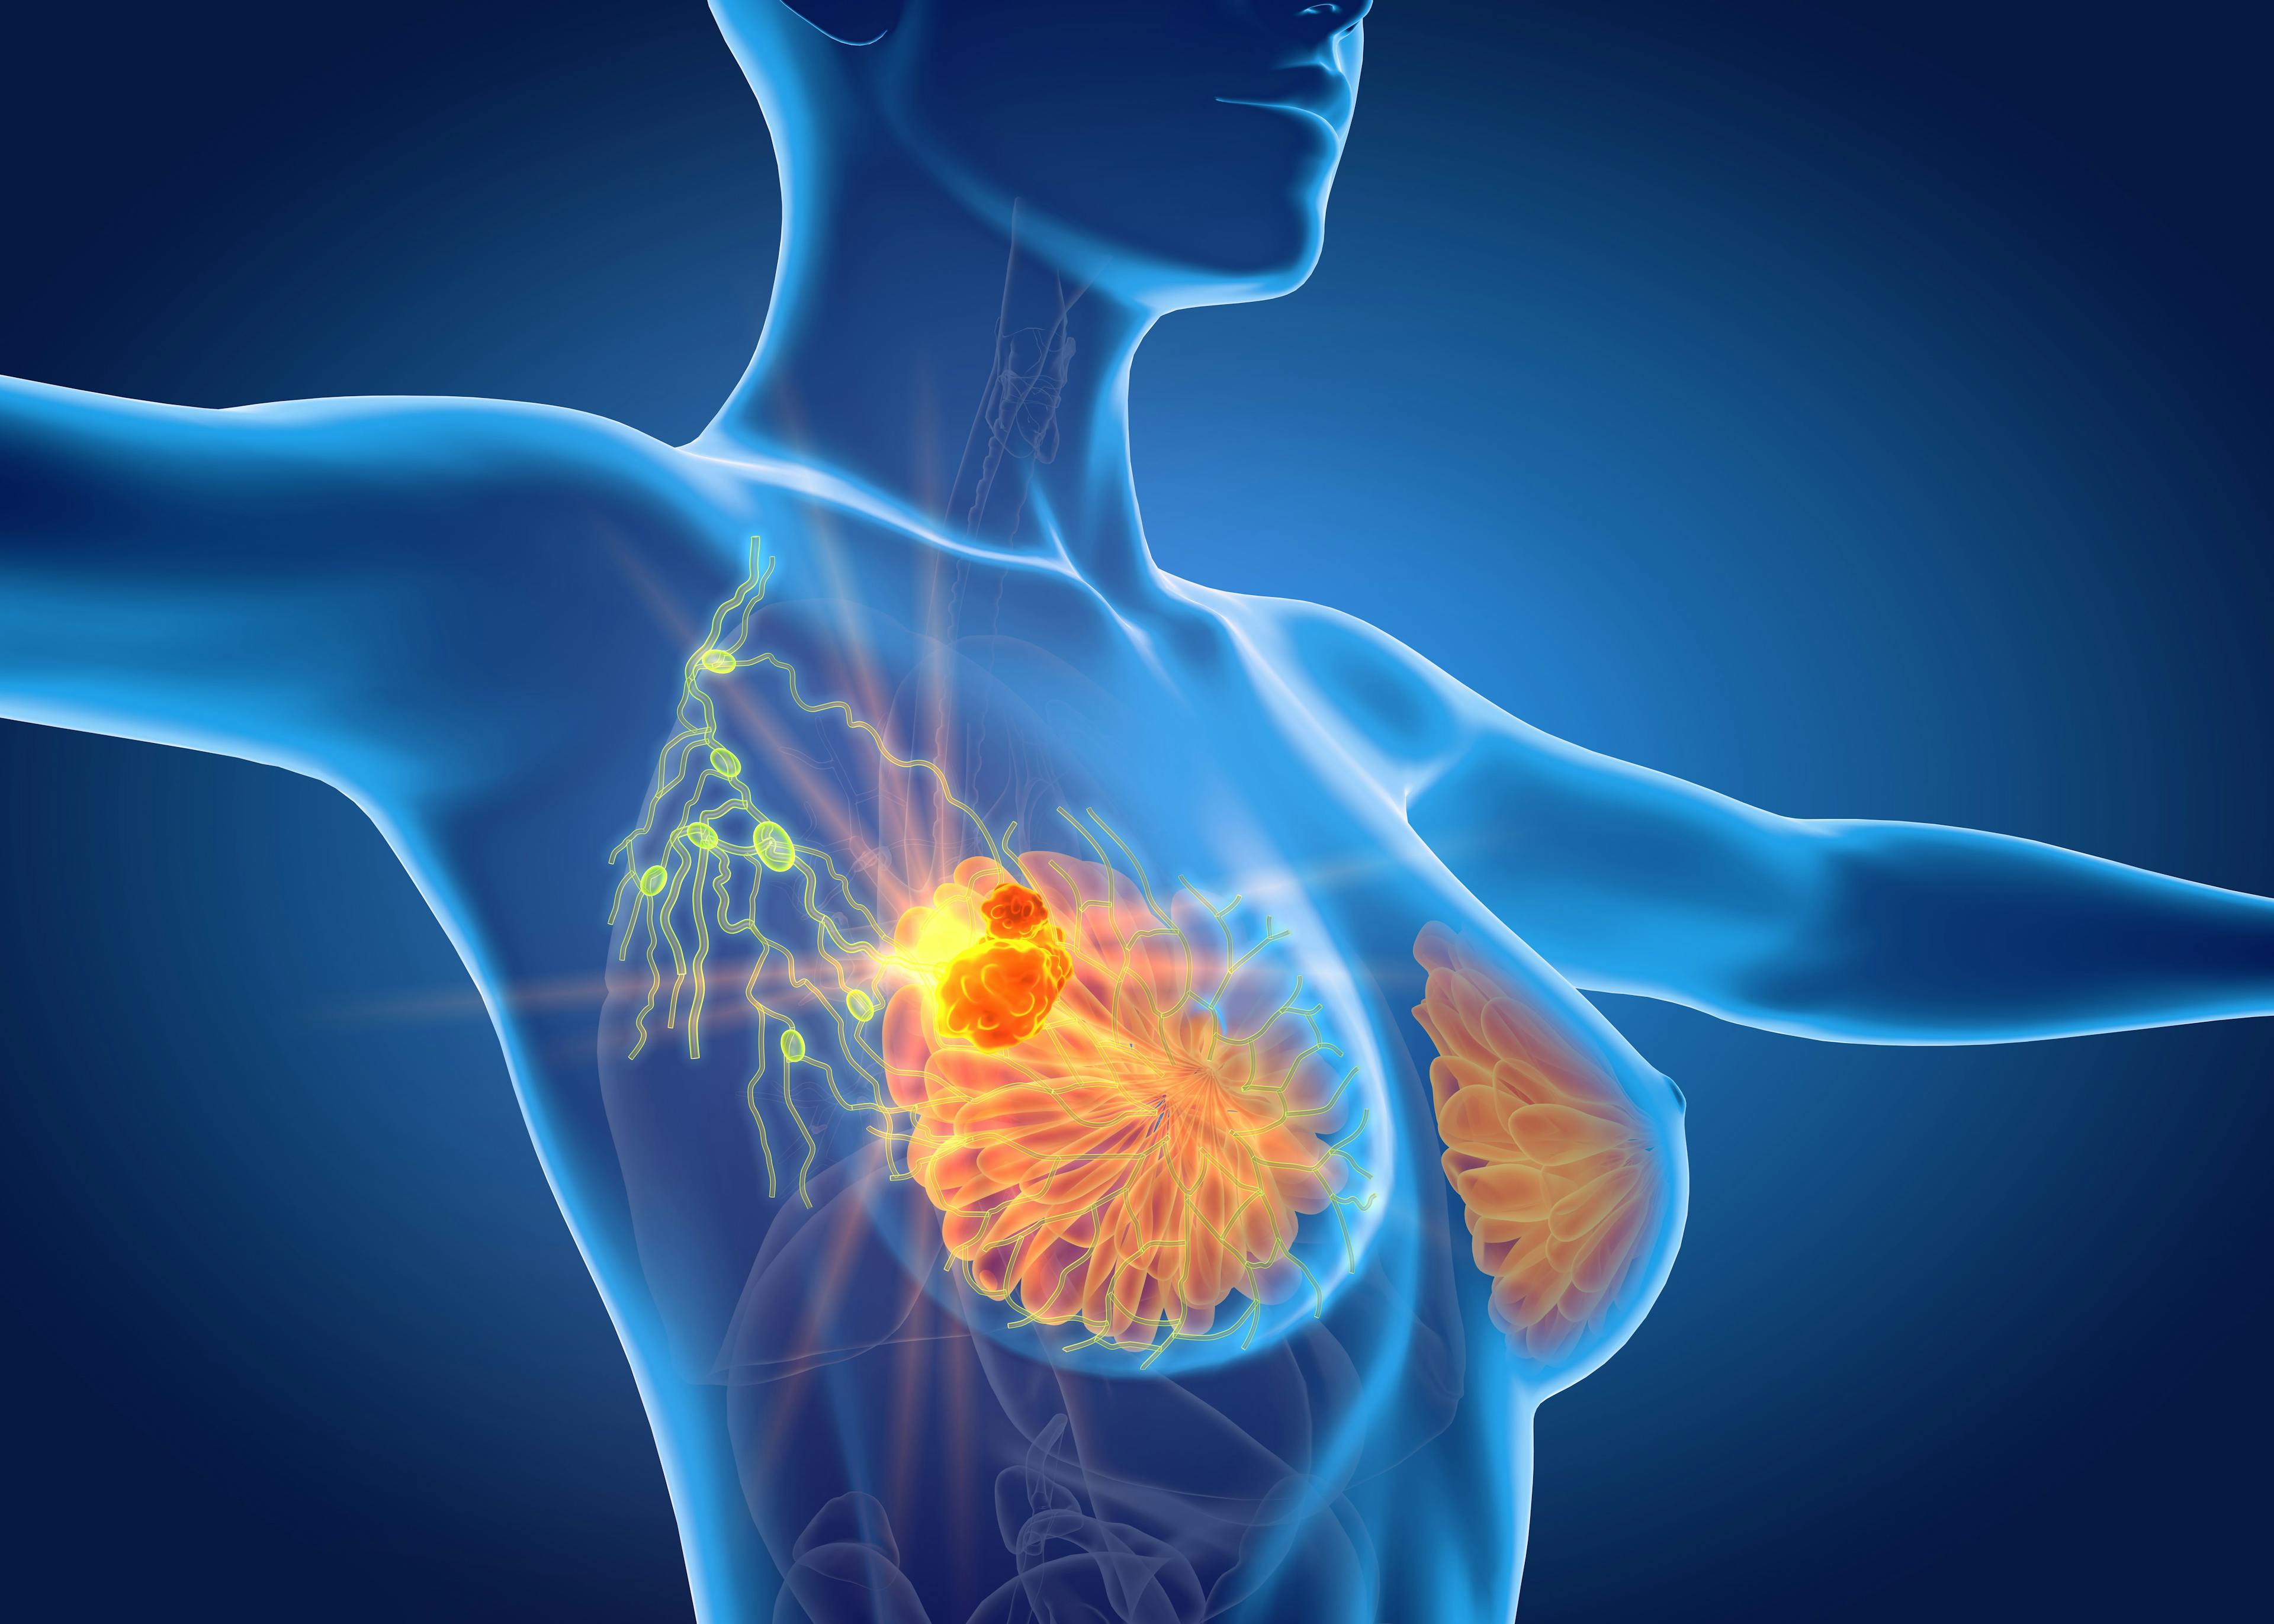 Abemaciclib Plus Endocrine Therapy Improved Survival in HR+/HER2– High-Risk Early Breast Cancer